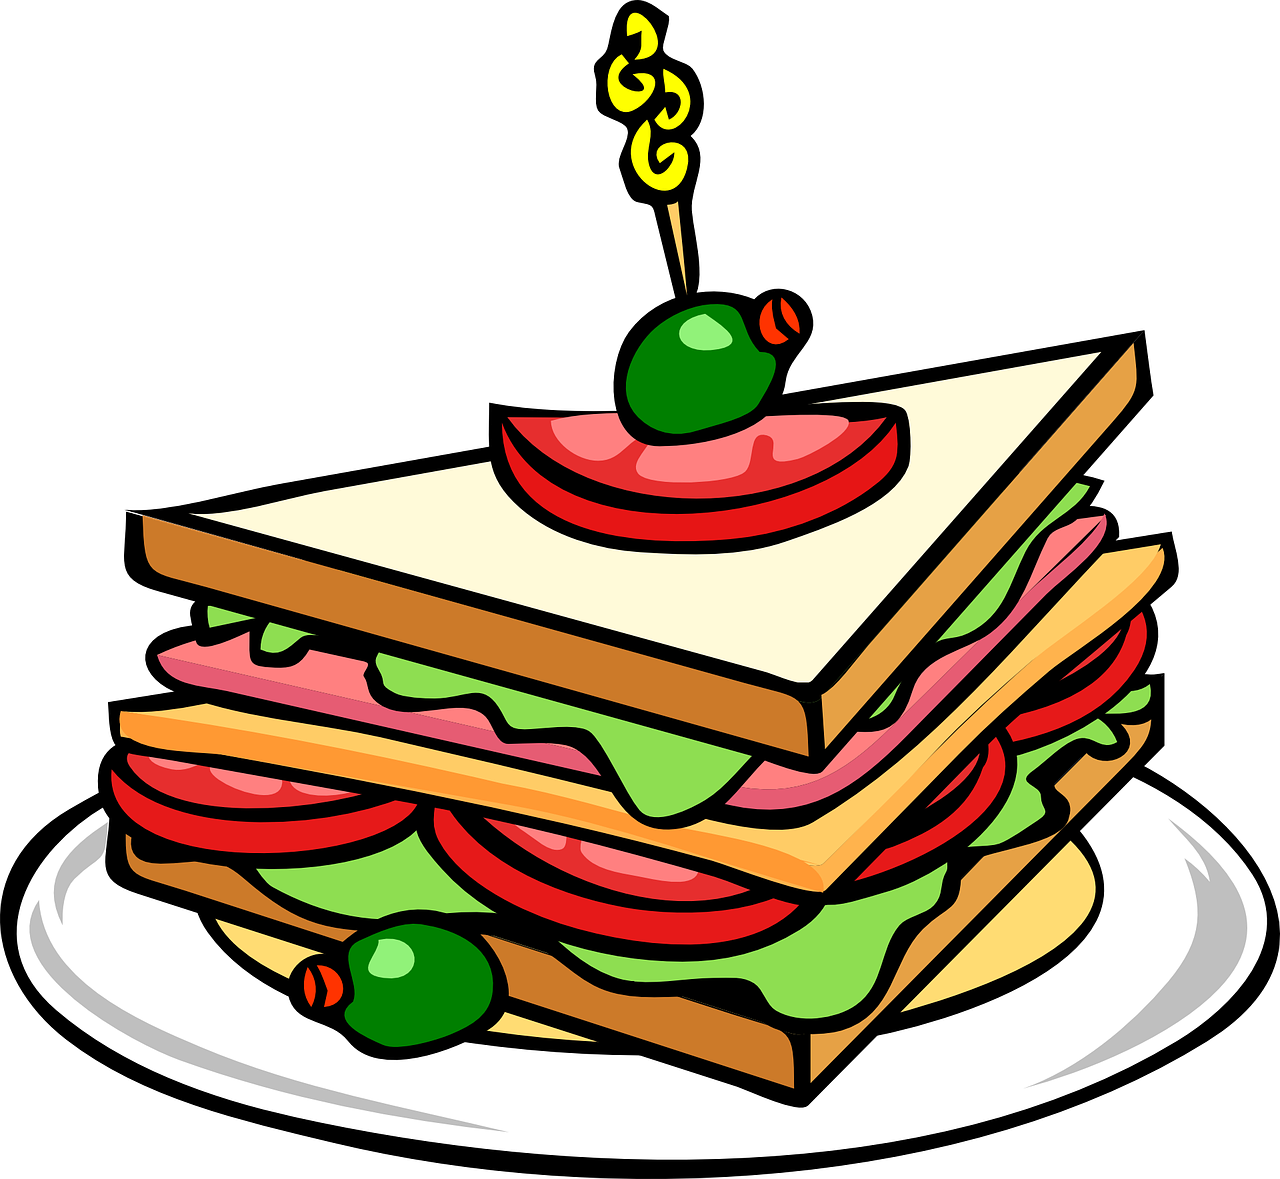 meal-clipart-school-lunch-picture-1628234-meal-clipart-school-lunch